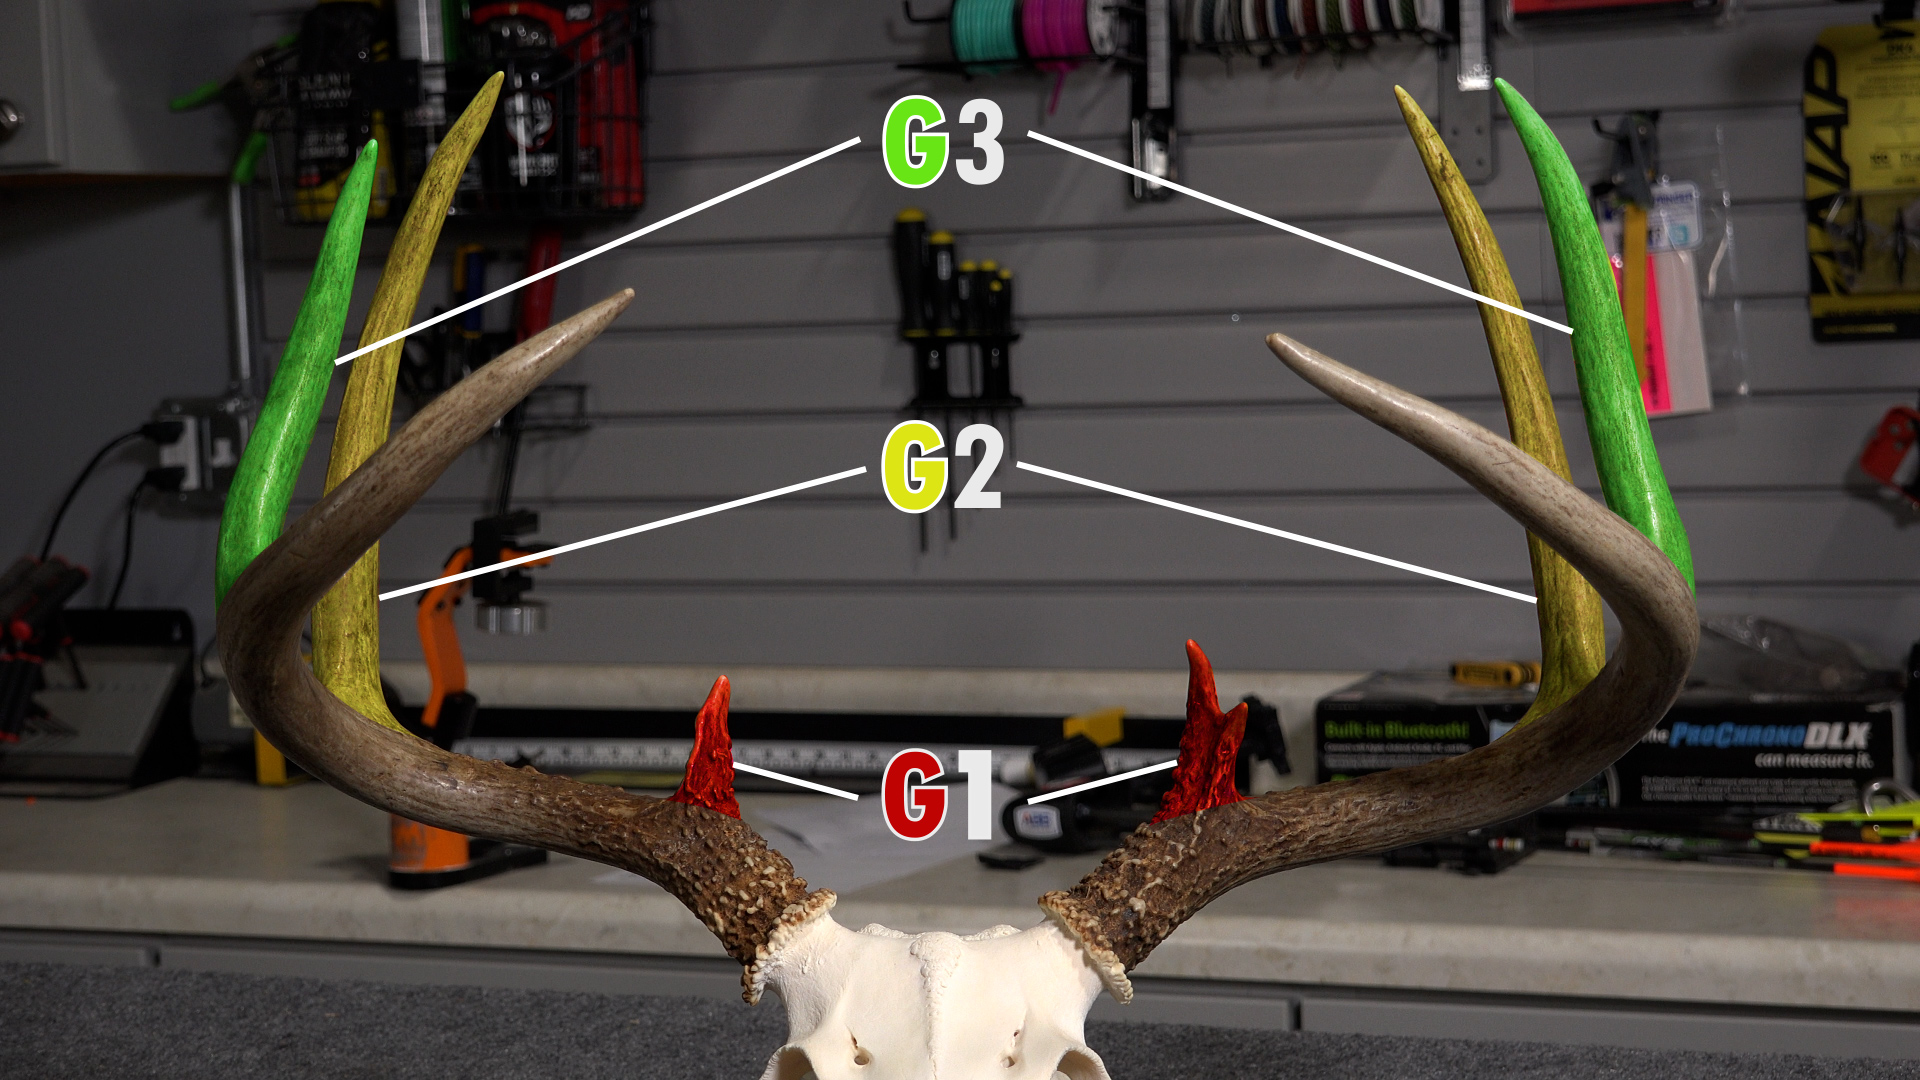 Measuring the G's of antlers